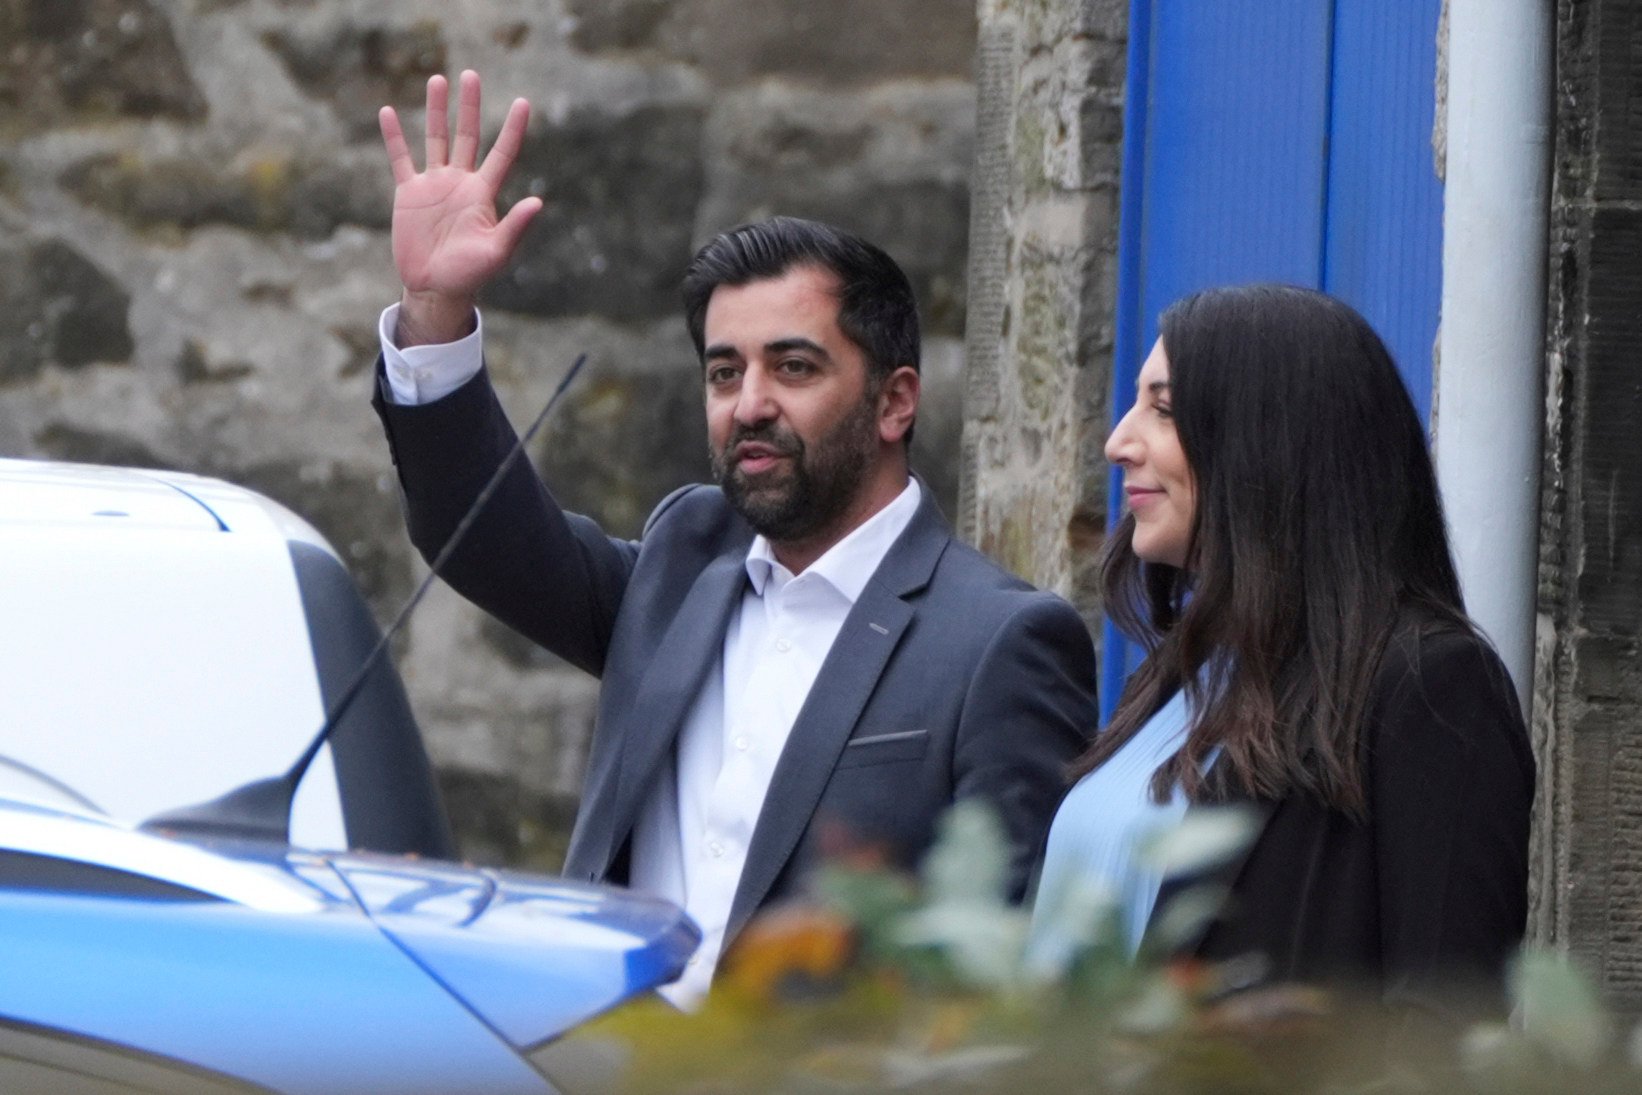 Scotland’s First Minister Humza Yousaf and his wife Nadia El-Nakla leave Bute House in Edinburgh, the official residence of Scotland’s premier, after he announced on Monday that he will resign as SNP leader and first minister. Photo: PA via AP